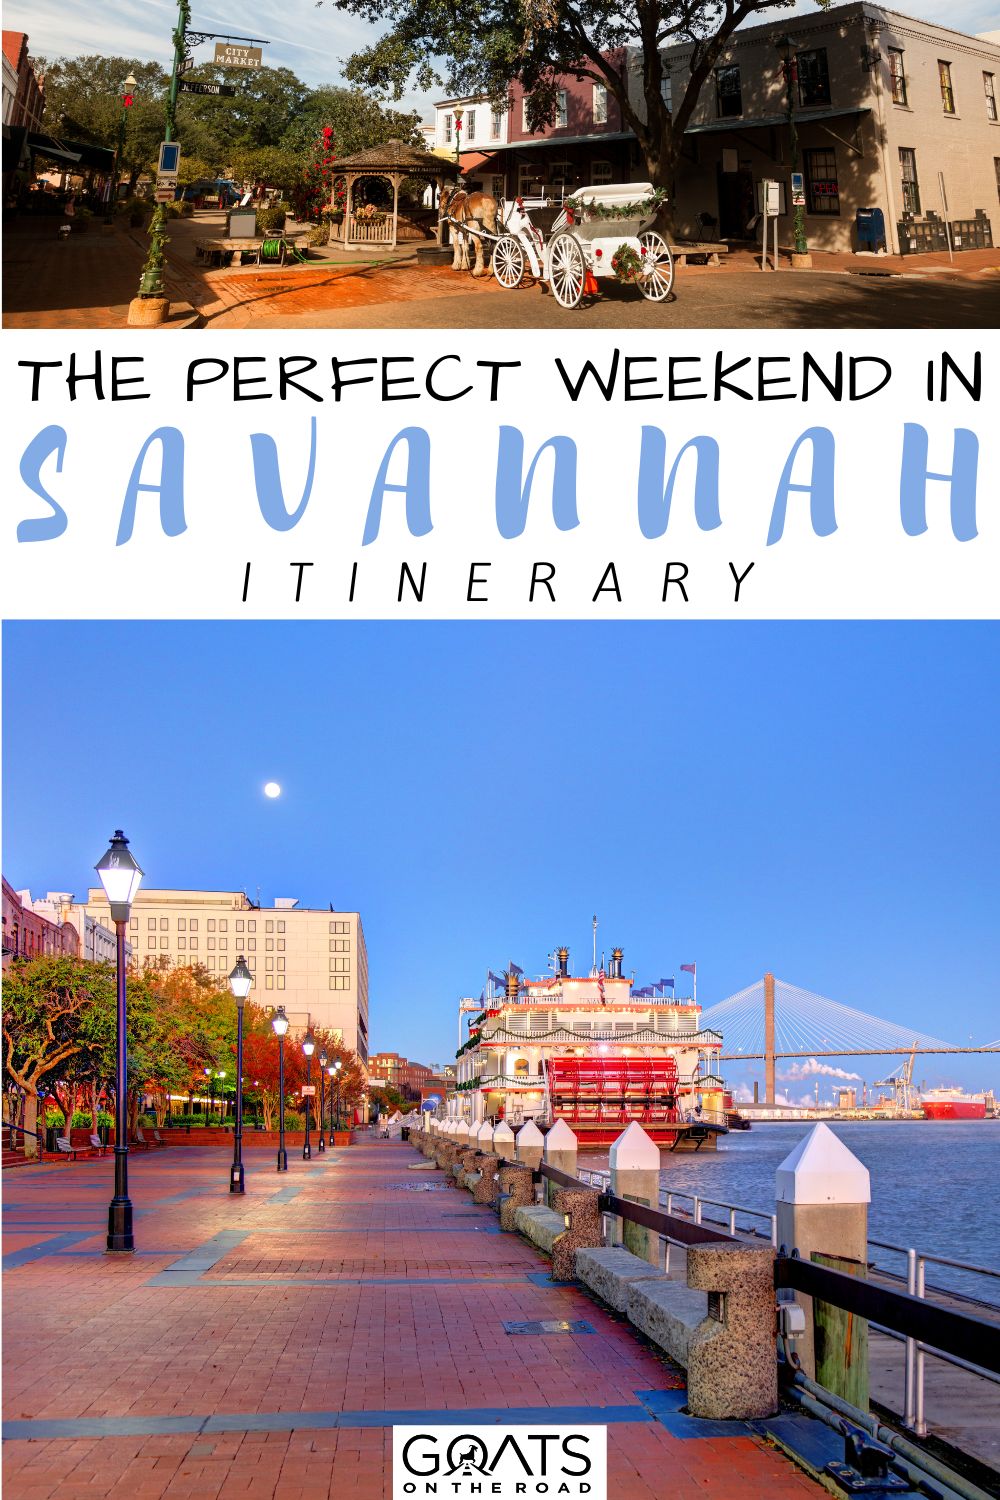 “The Perfect Weekend in Savannah Itinerary